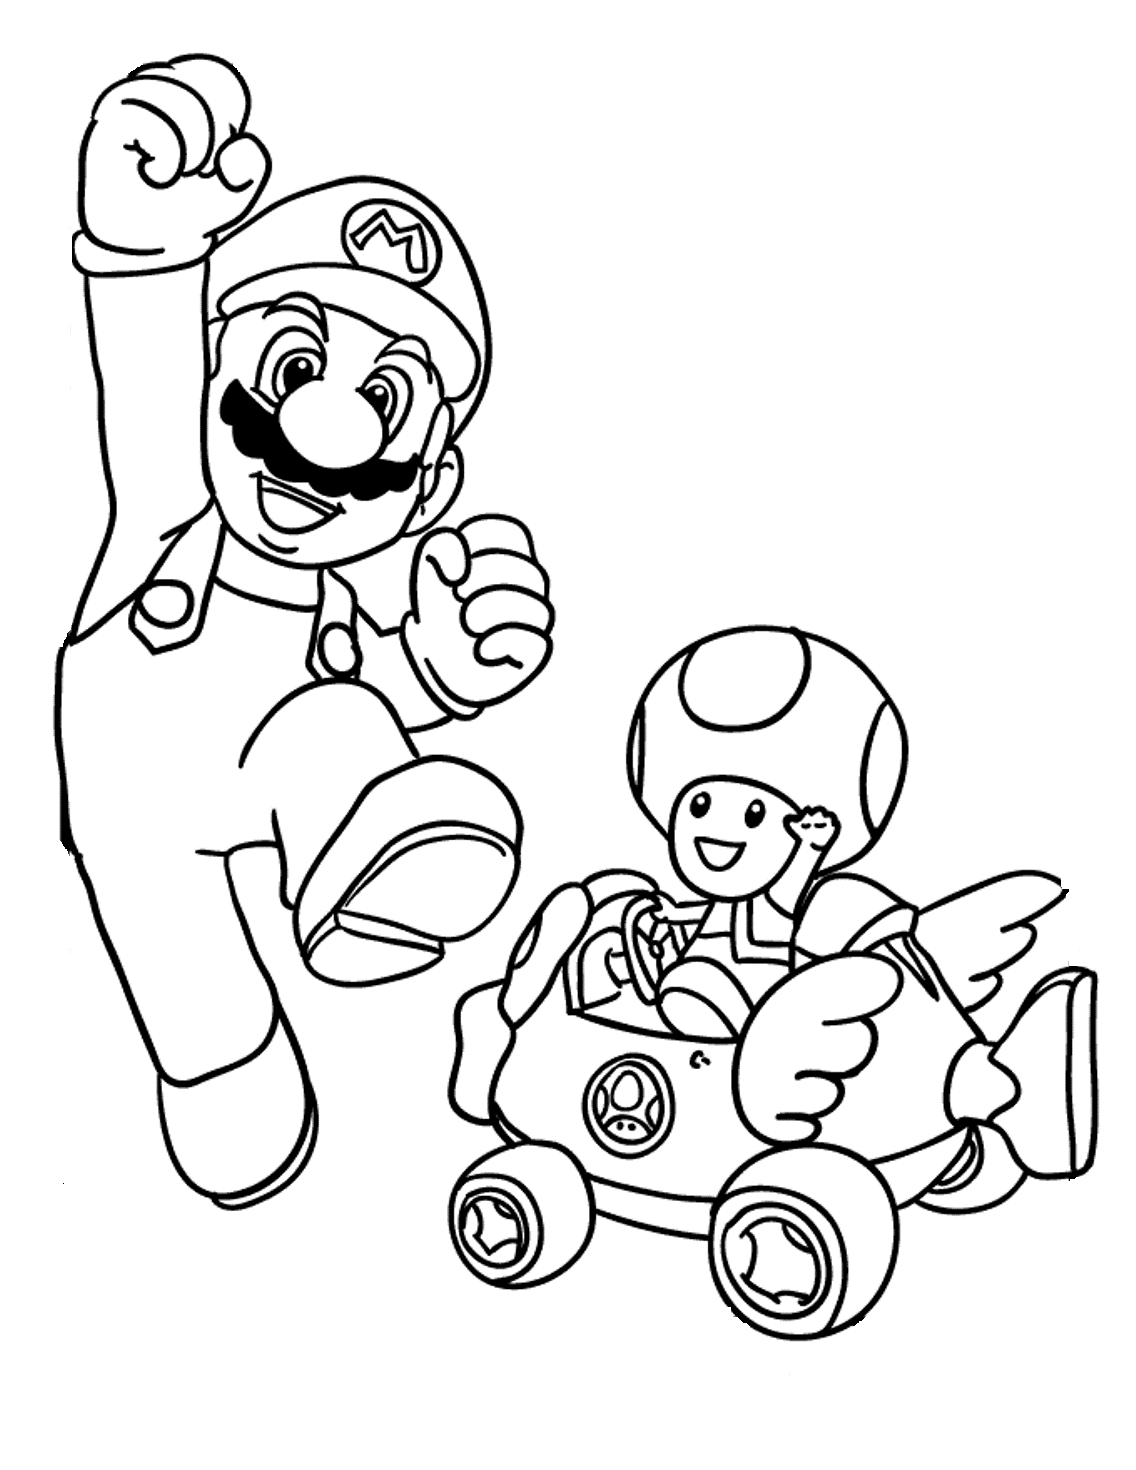 free-mario-coloring-pages-printable-printable-blank-world